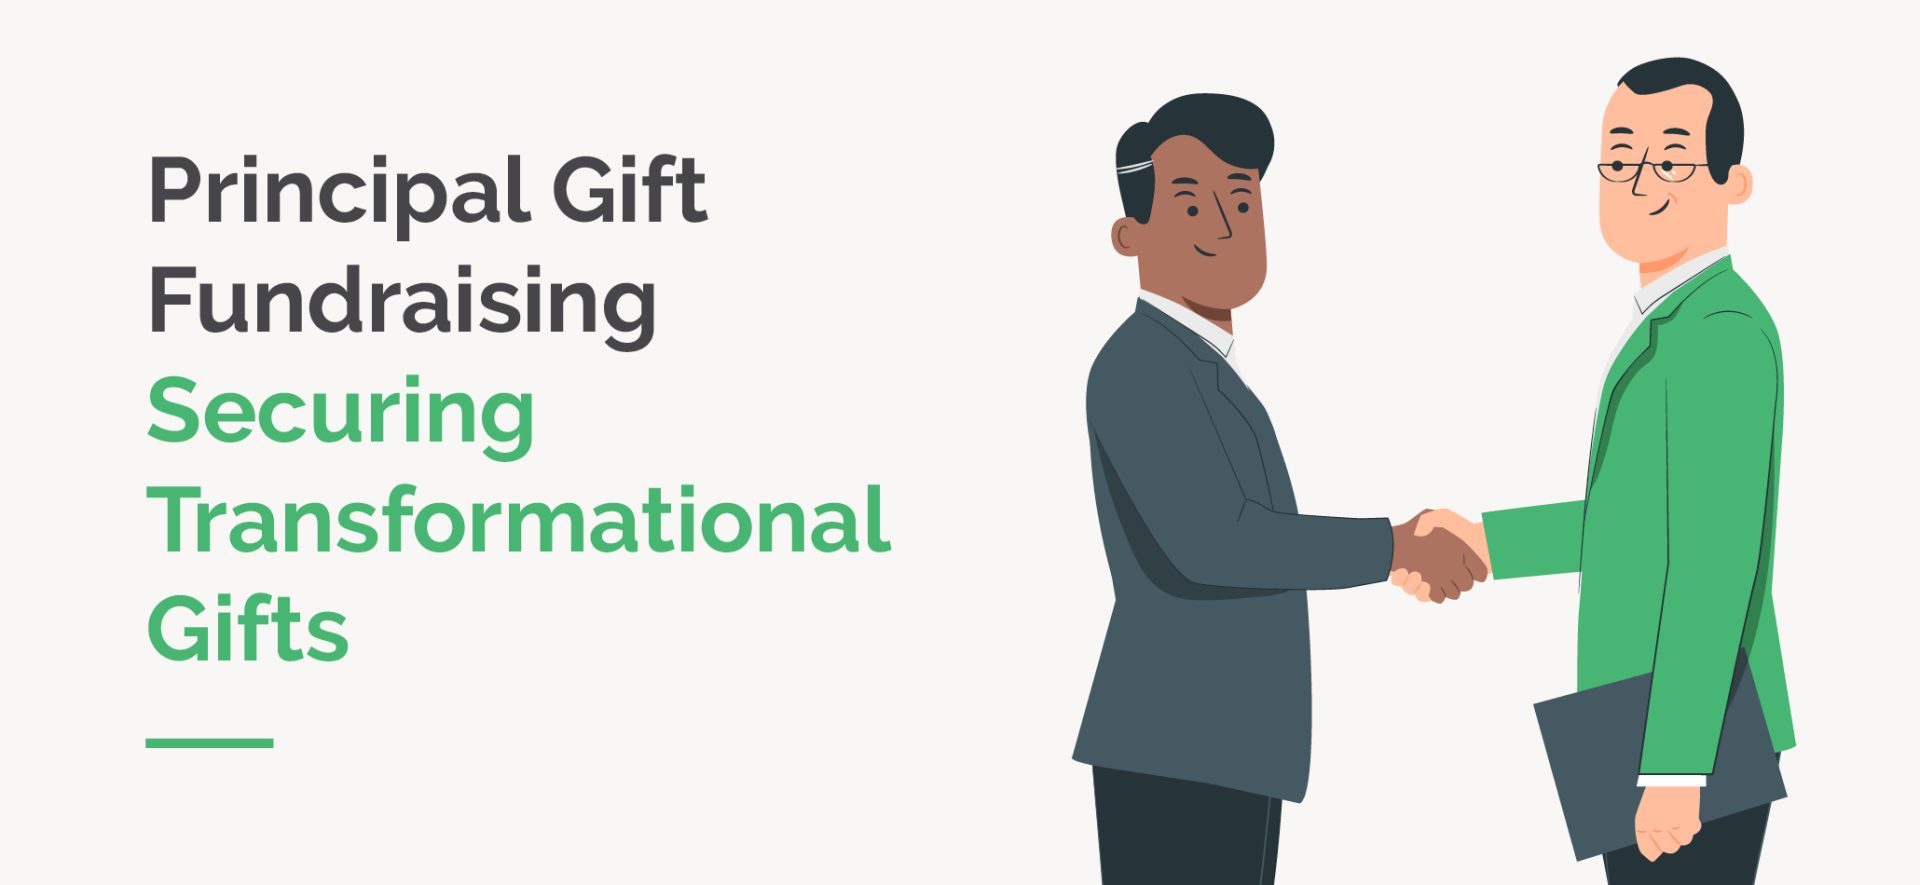 An illustration of two men shaking hands with the title of this article overlaid, Principal Gift Fundraising: Securing Transformational Gifts"